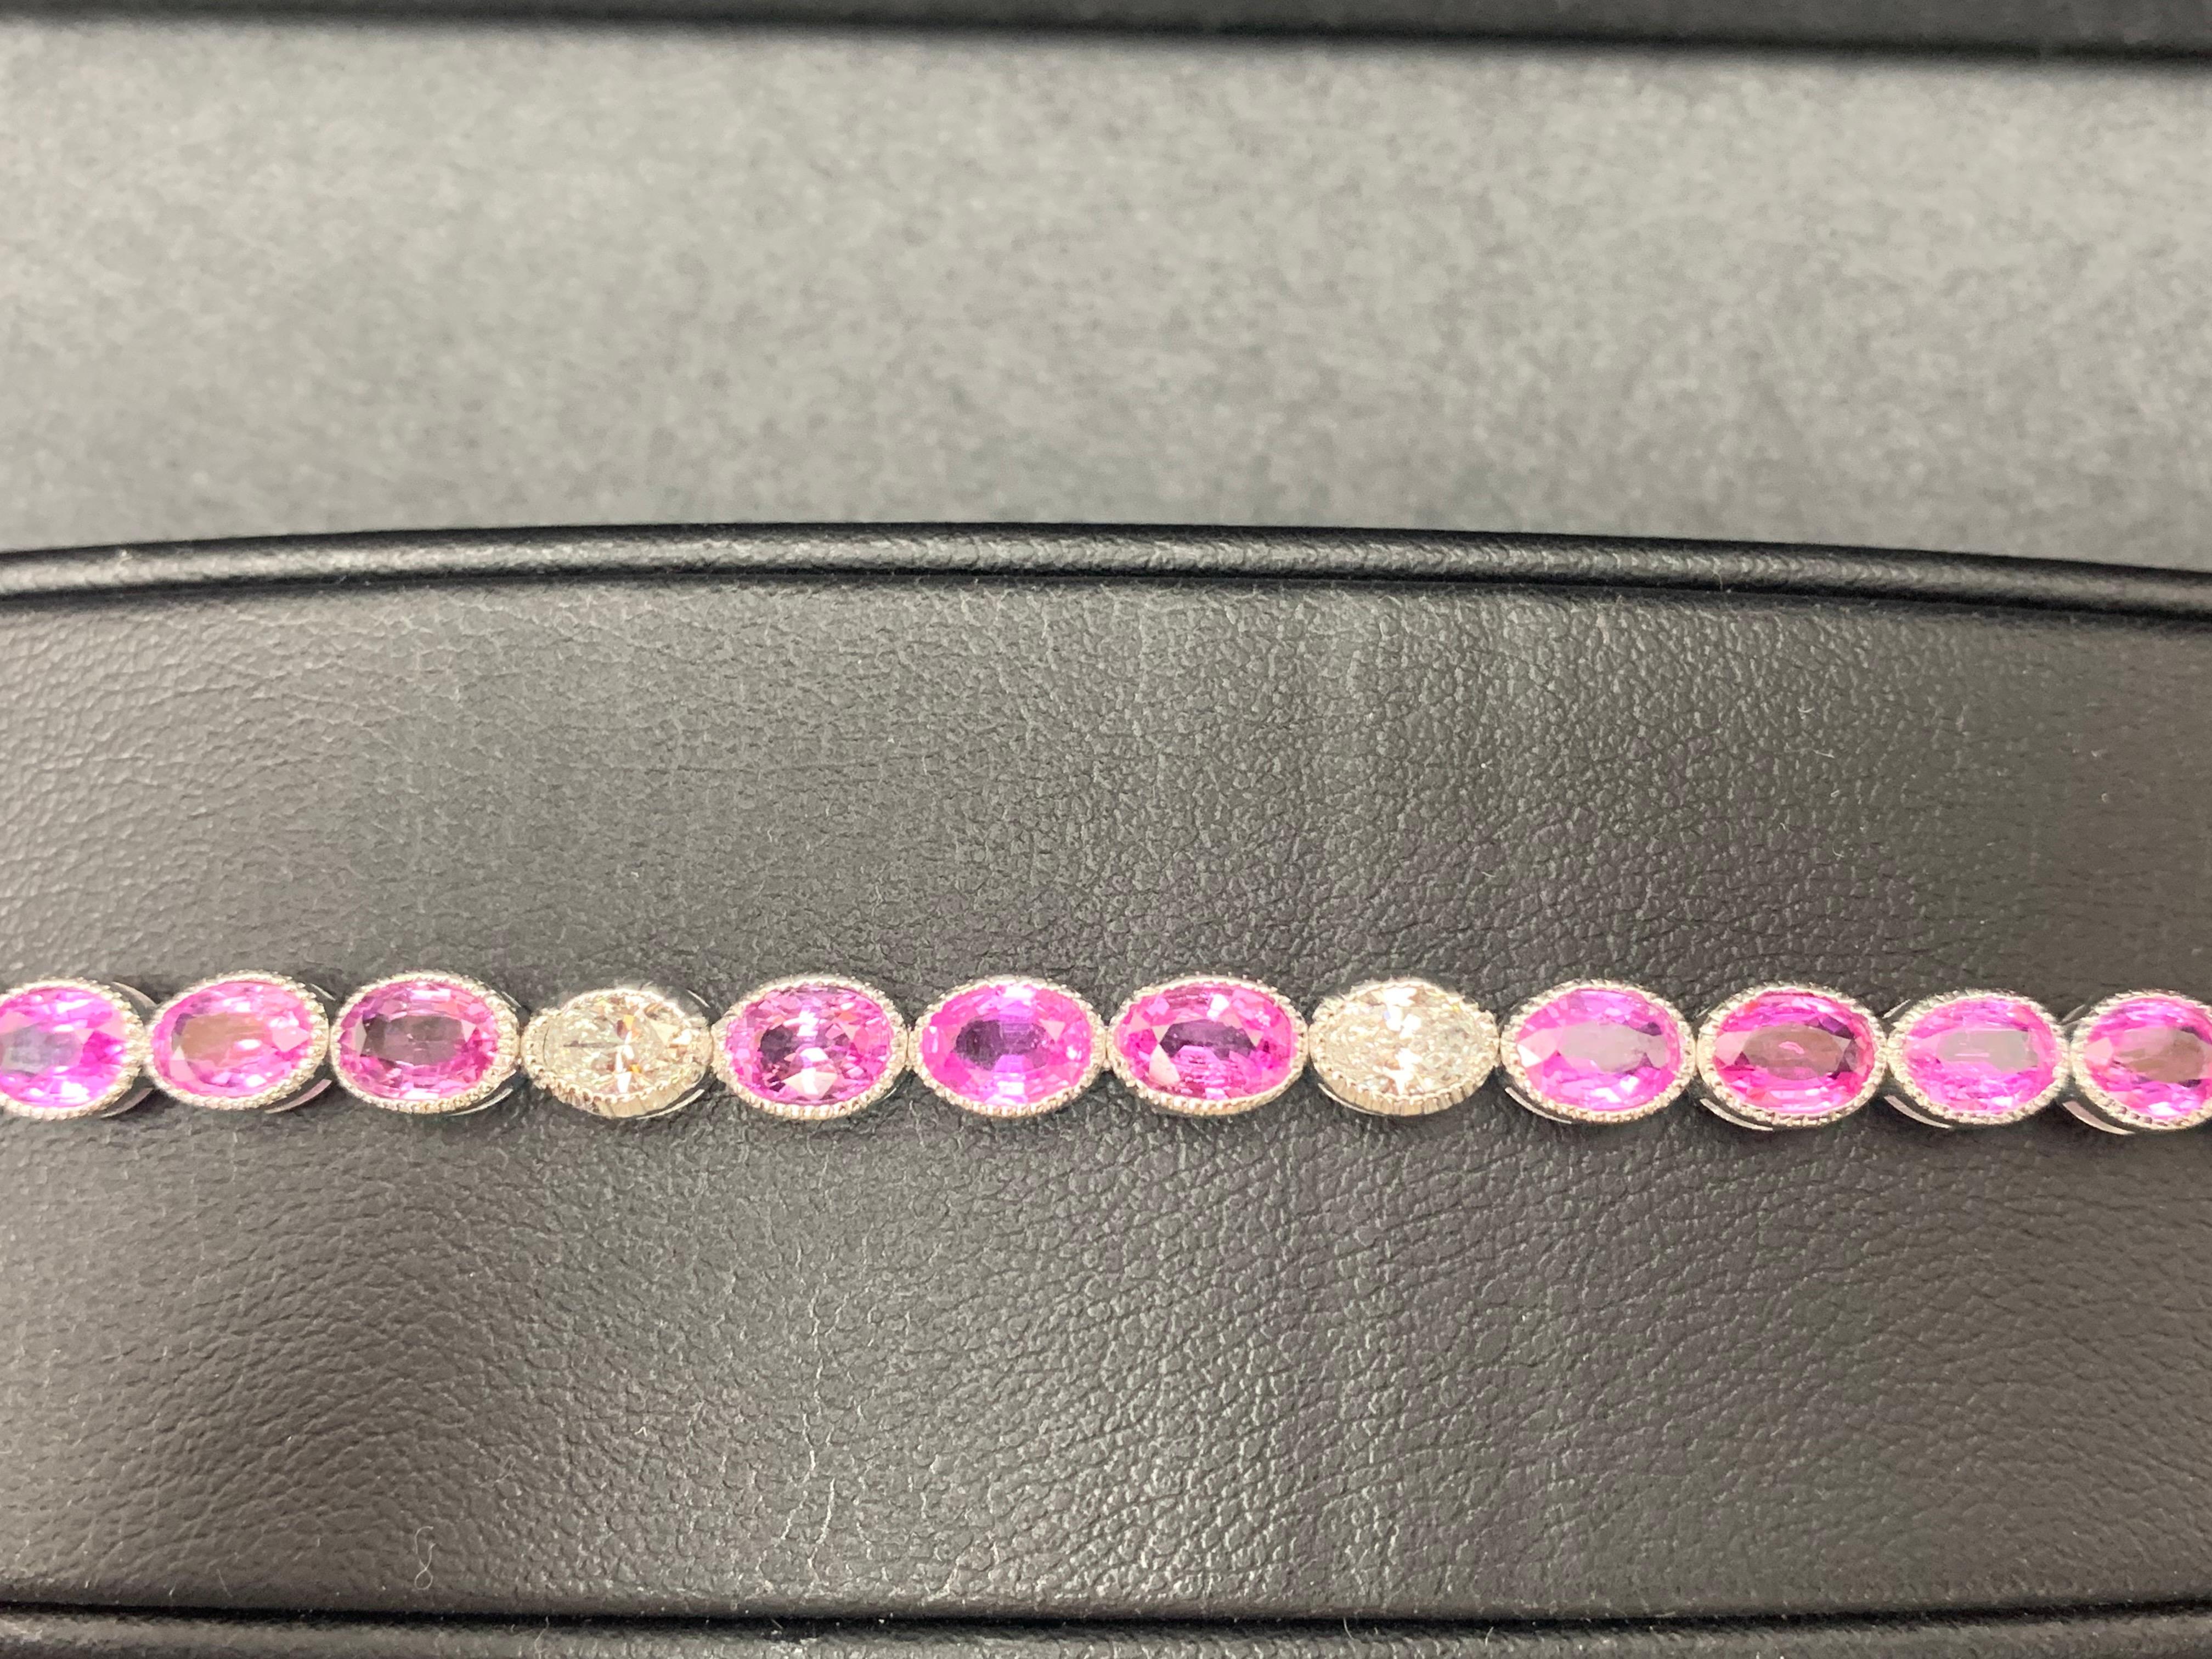 Modern 12.62 Carat Oval Cut Pink Sapphire and Diamond Tennis Bracelet in 14K White Gold For Sale